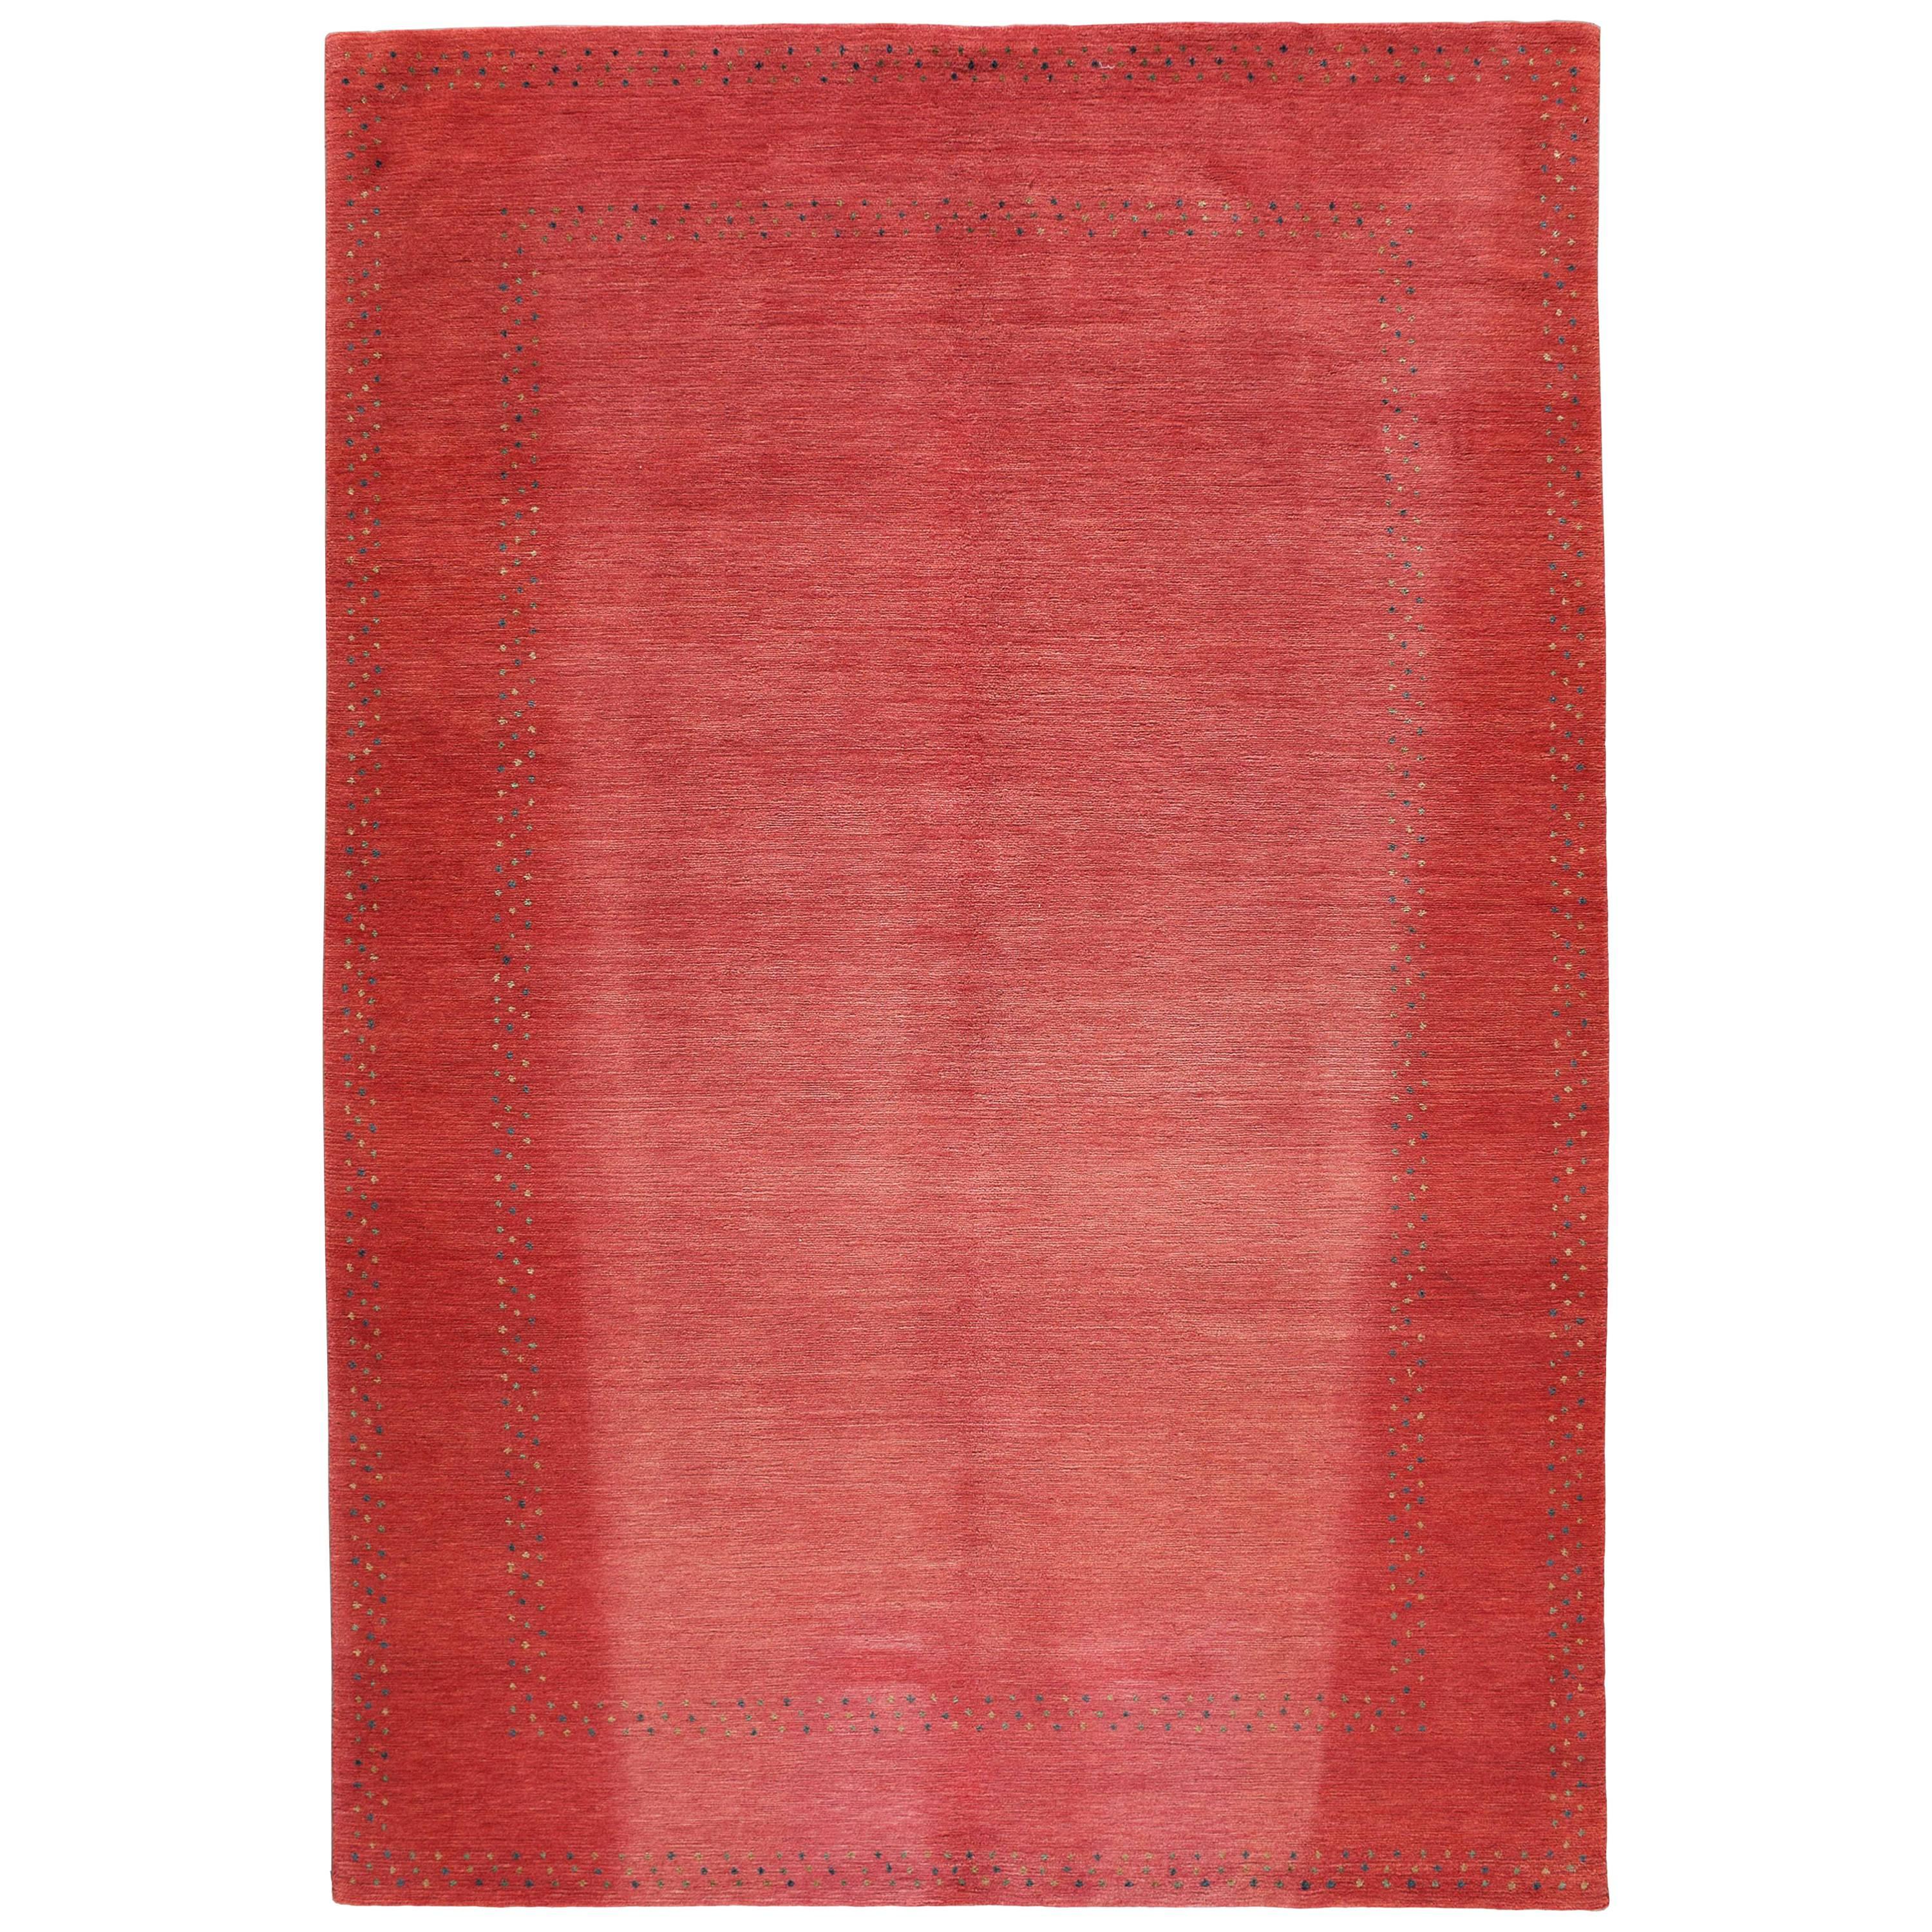 Red Ombre Rug with Gold Dots For Sale